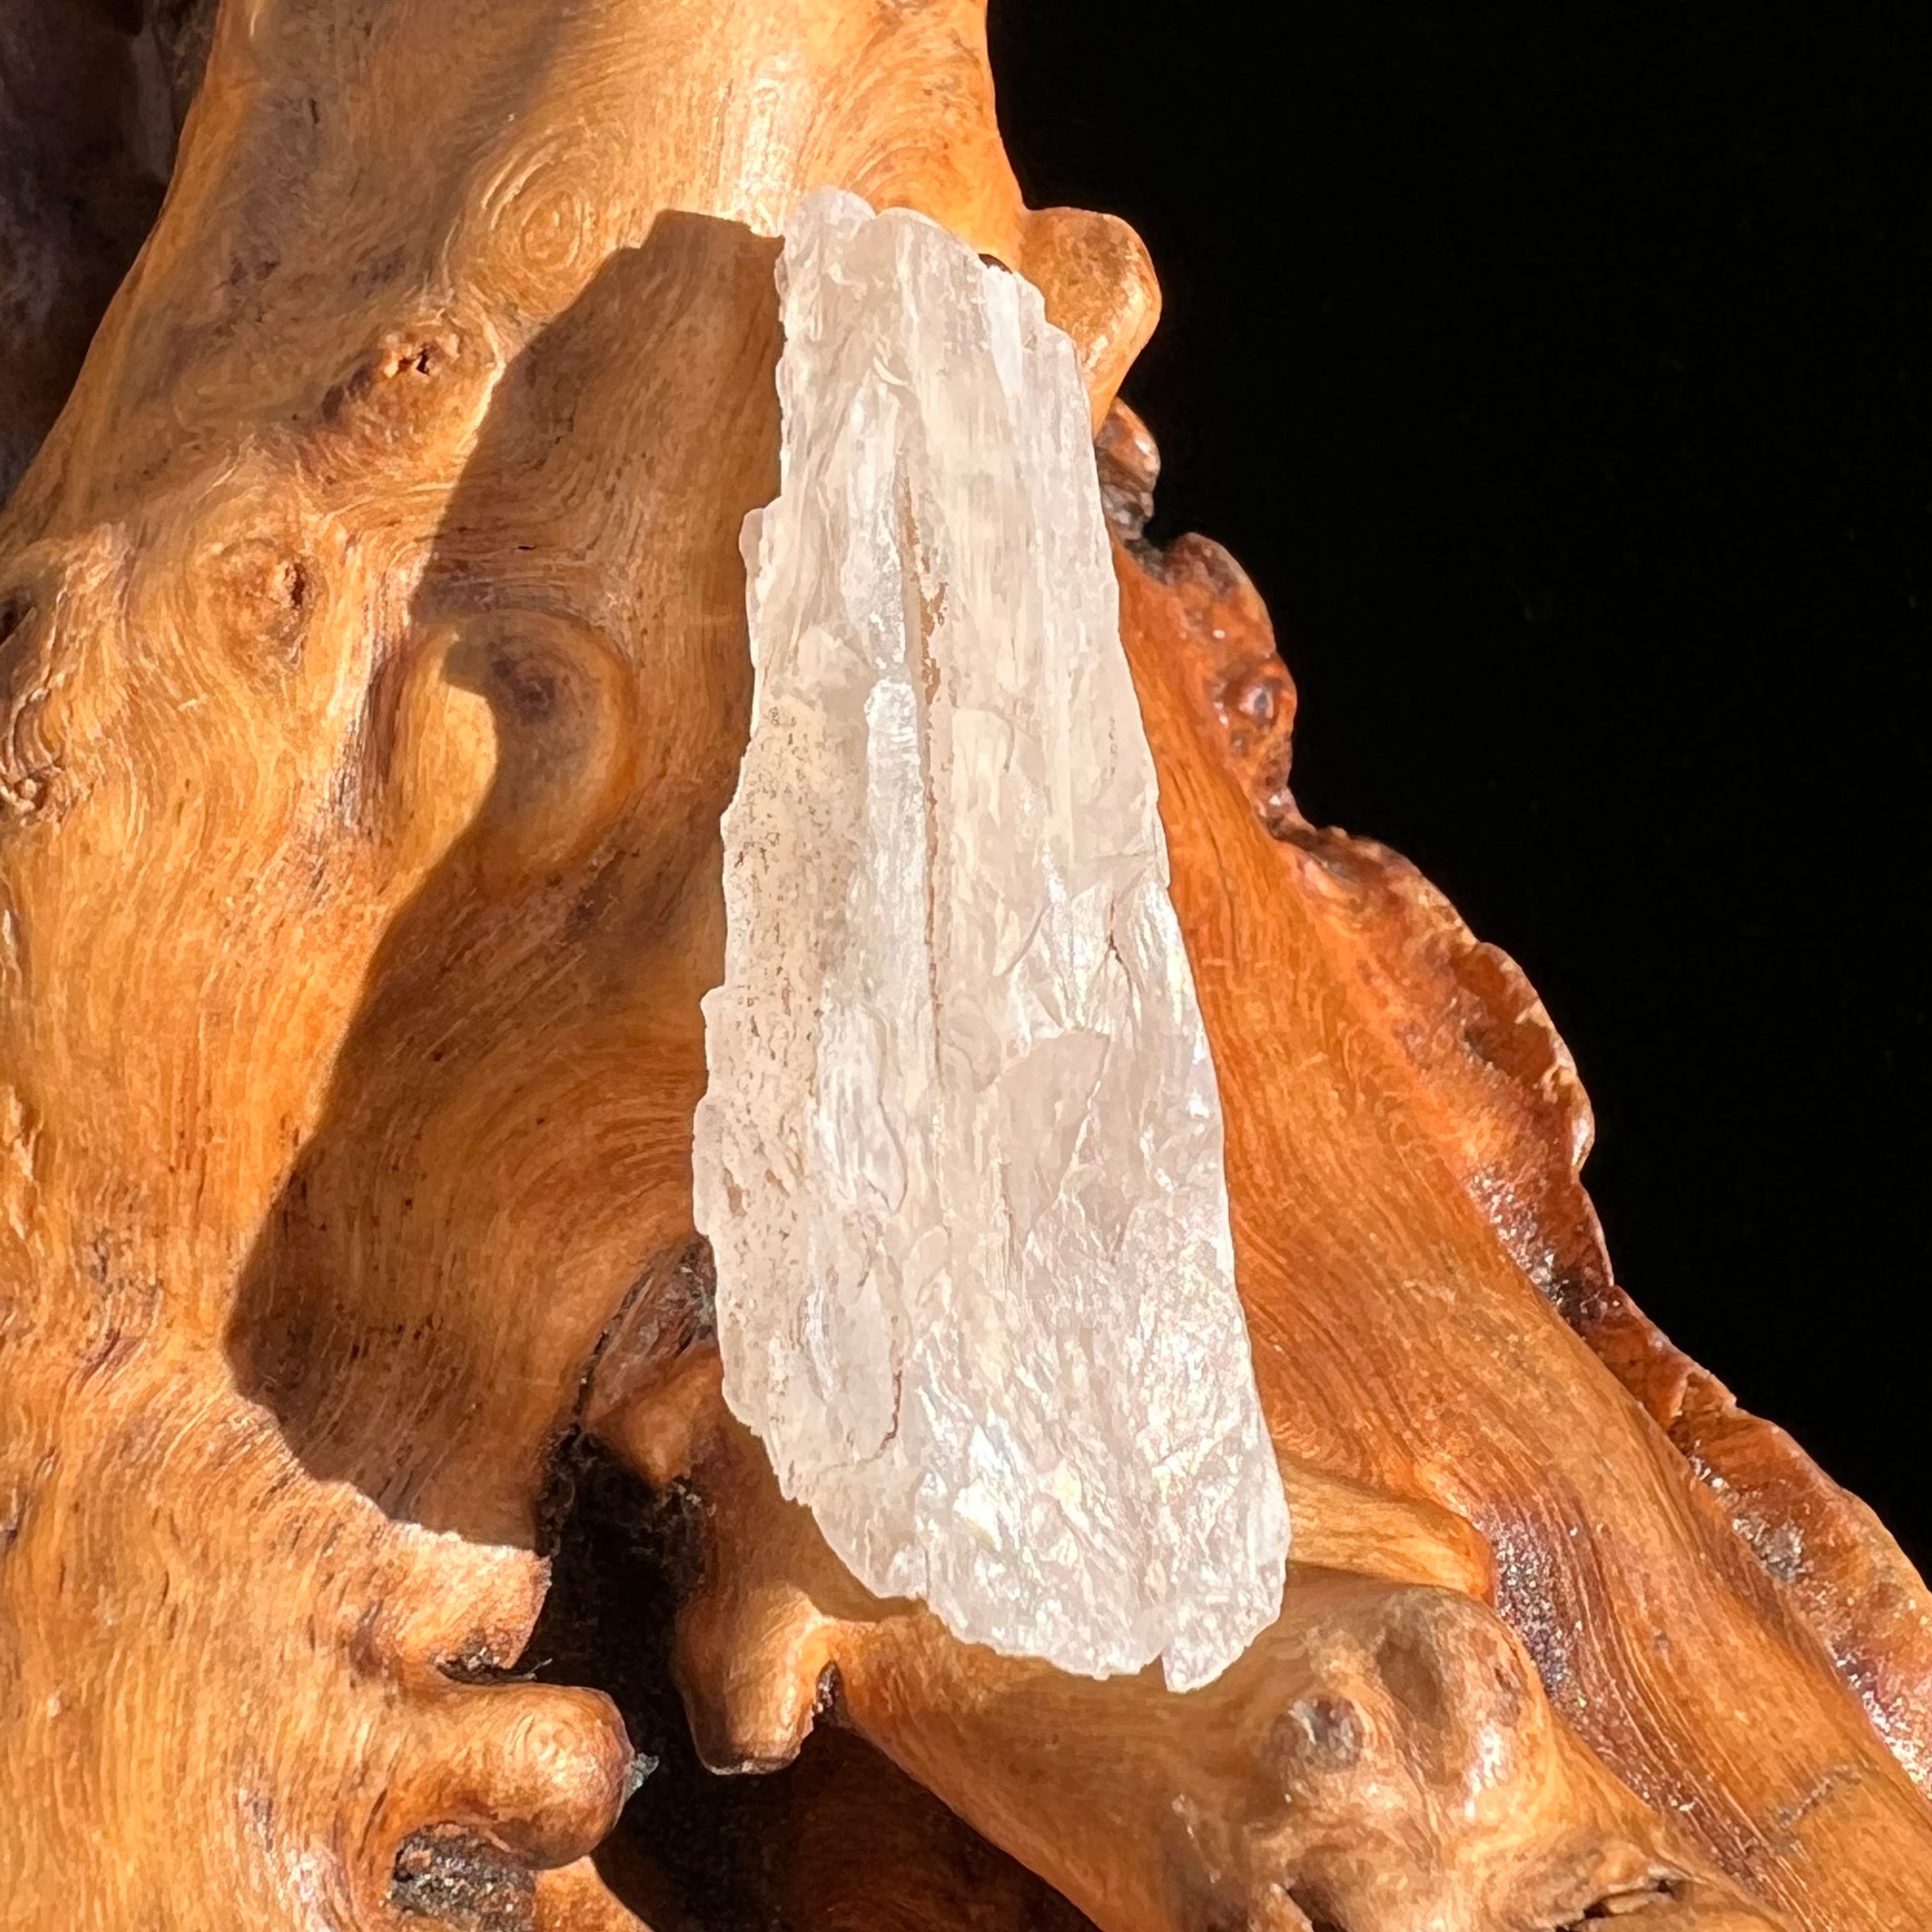 Petalite Crystal "Stone of the Angels" #7